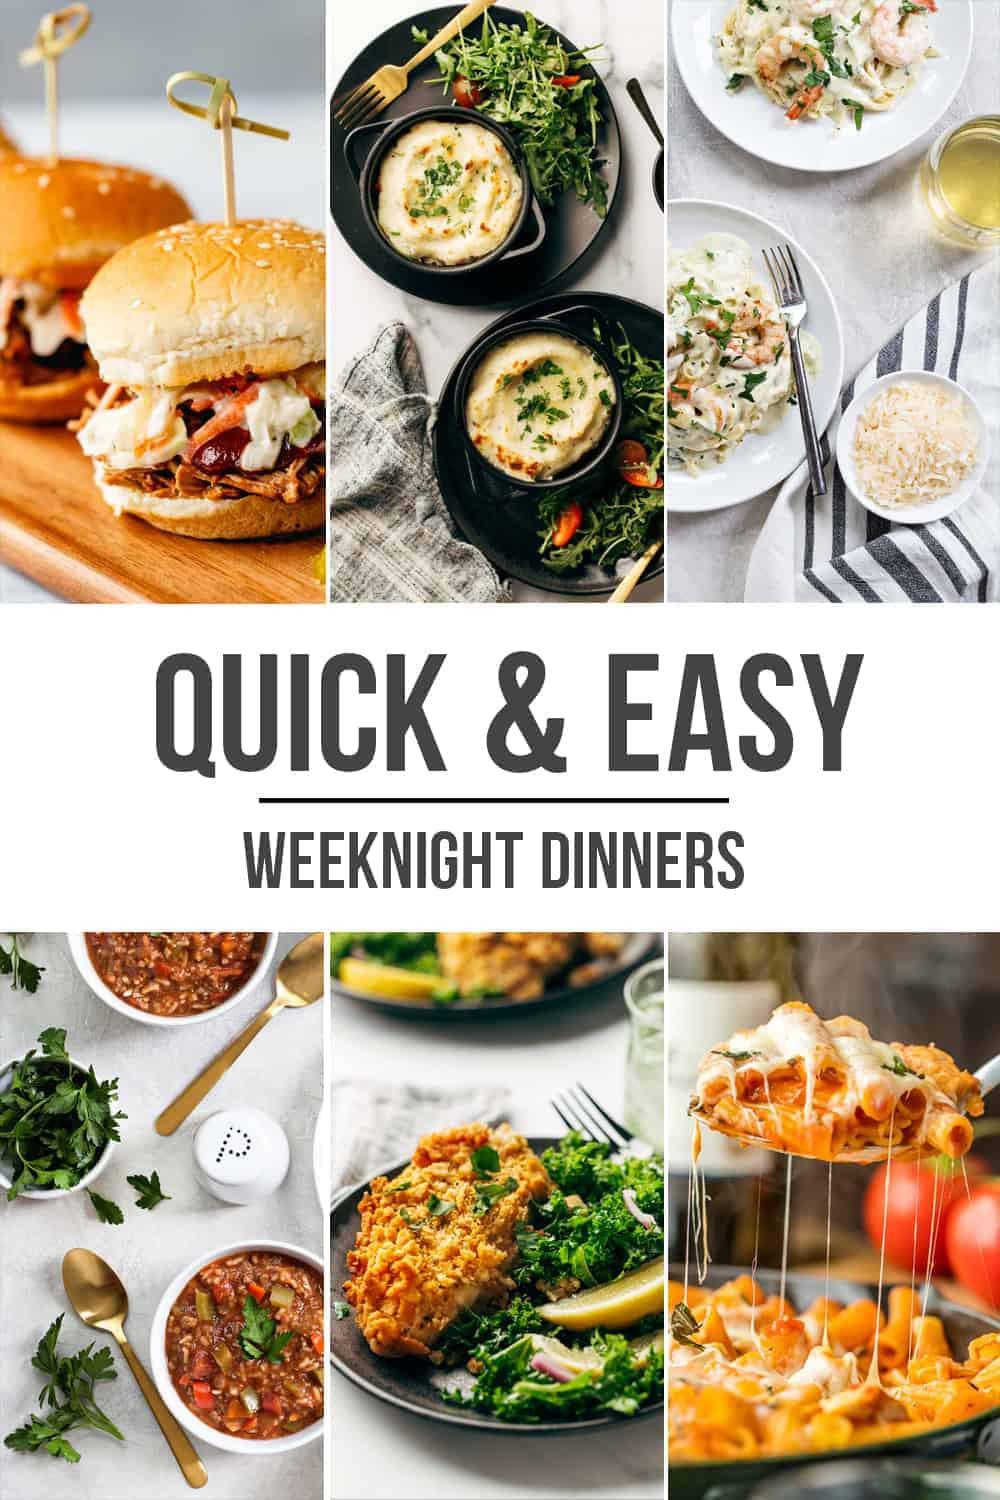 Weeknight Dinner Recipes
 10 Quick and Easy Weeknight Dinners My Baking Addiction